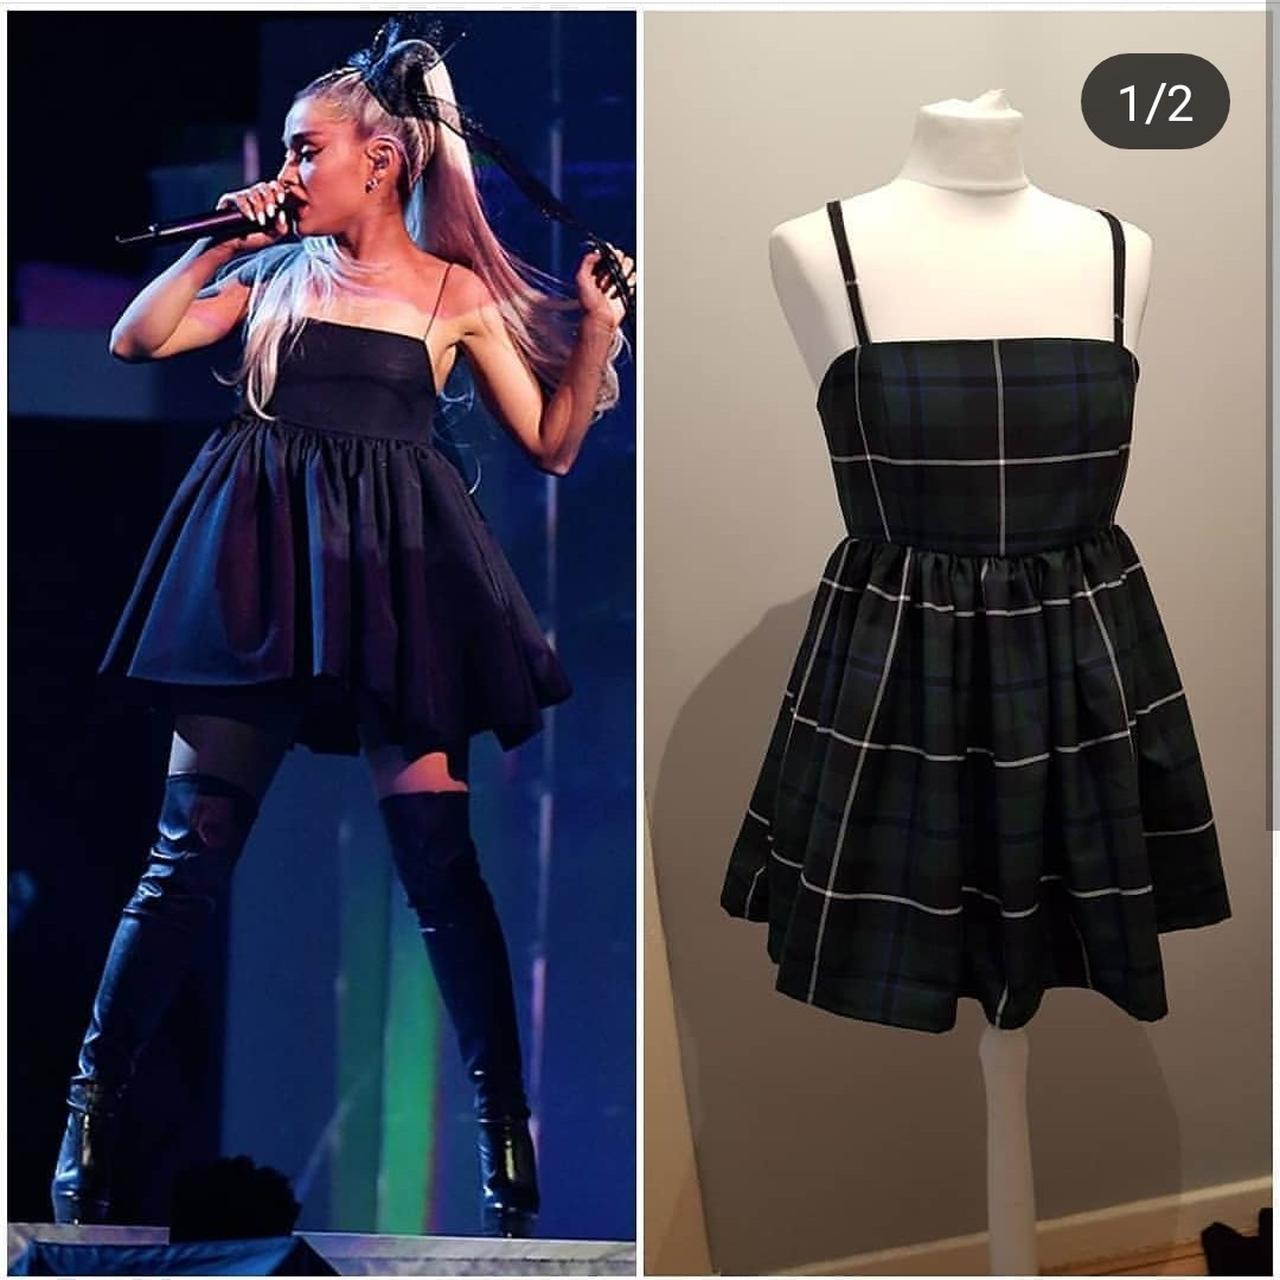 arianagrande style babydoll dress. Made ...